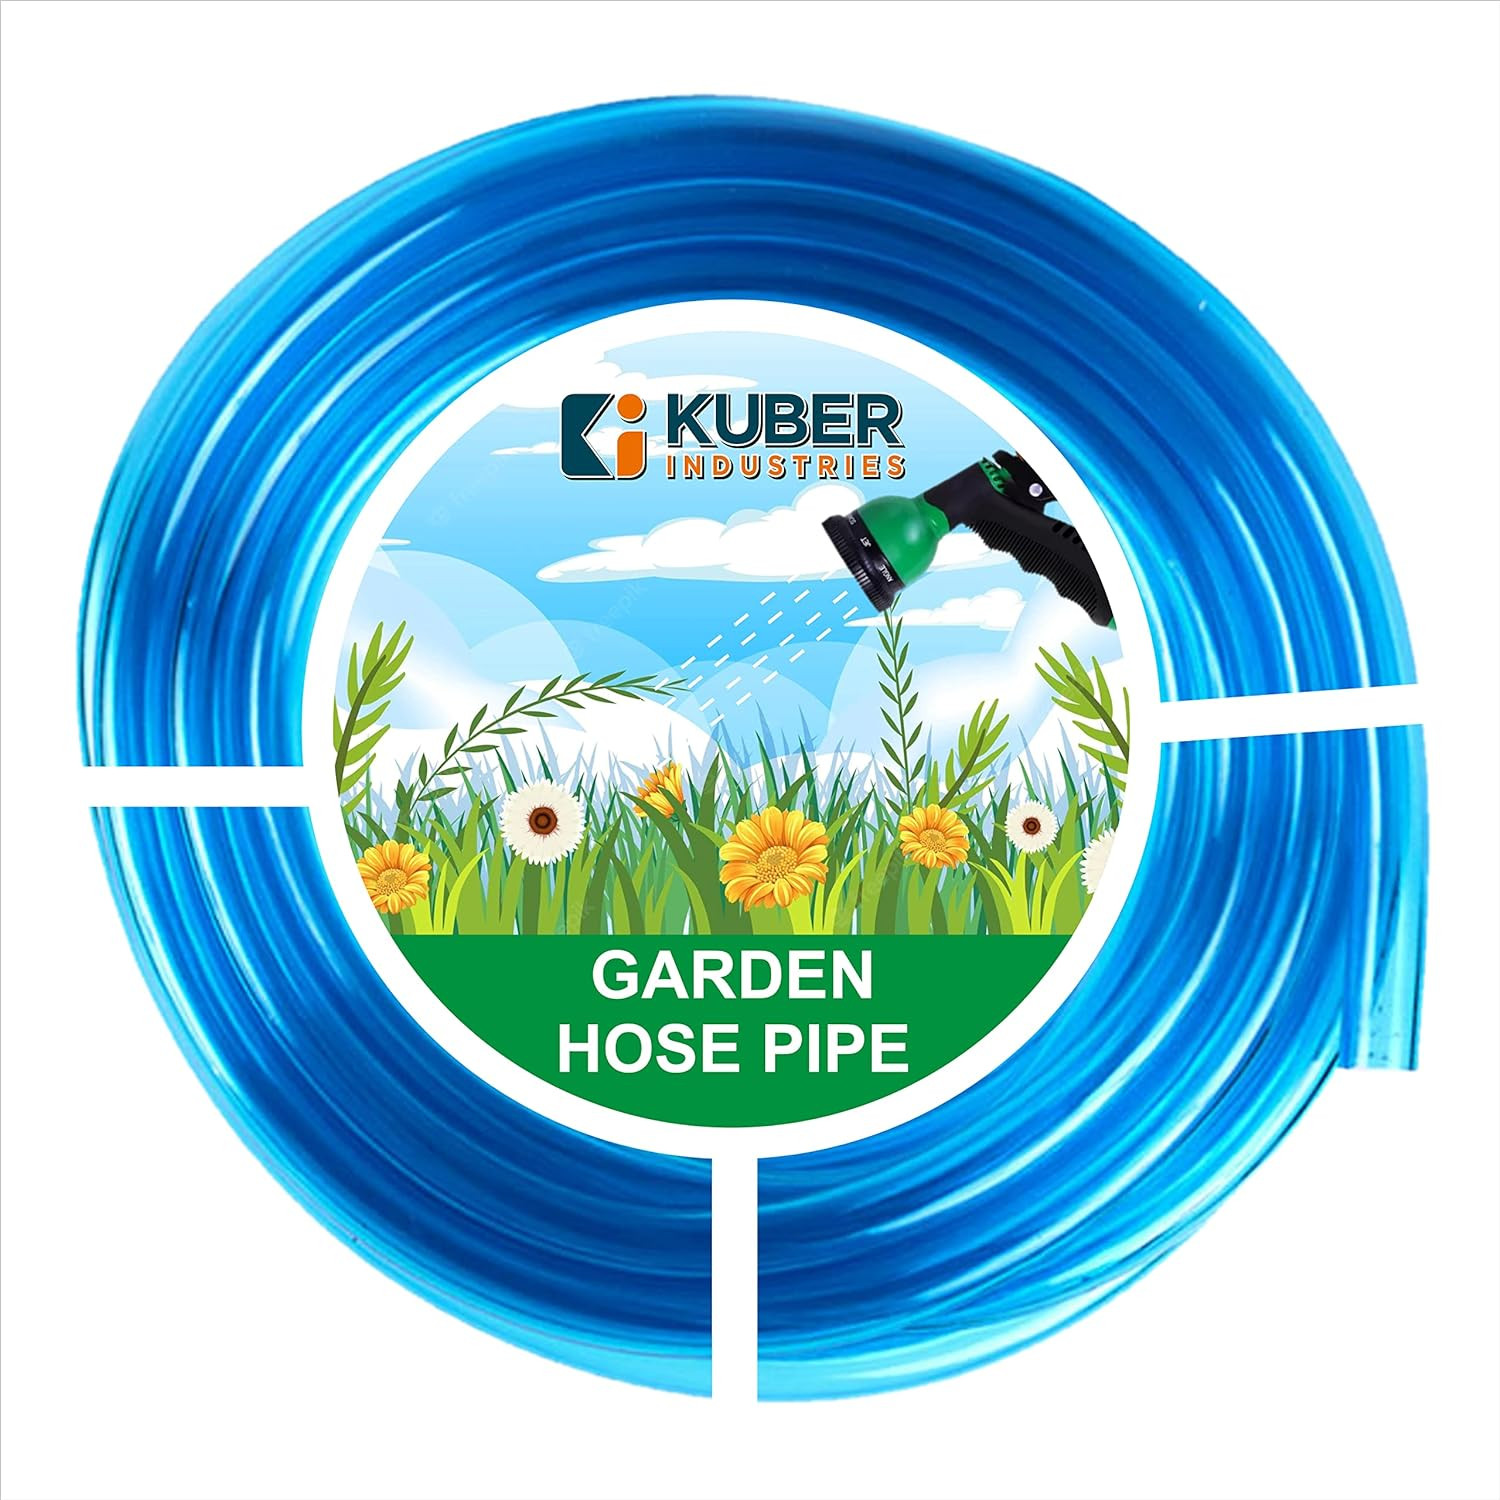 Kuber Industries Basic PVC Water Pipe 5 Meter|Multi-Utility Water Pipe for Garden, Car Cleaning & Pet Cleaning|Light Weight, & Flexible Hose Pipe for Gardening|Blue |